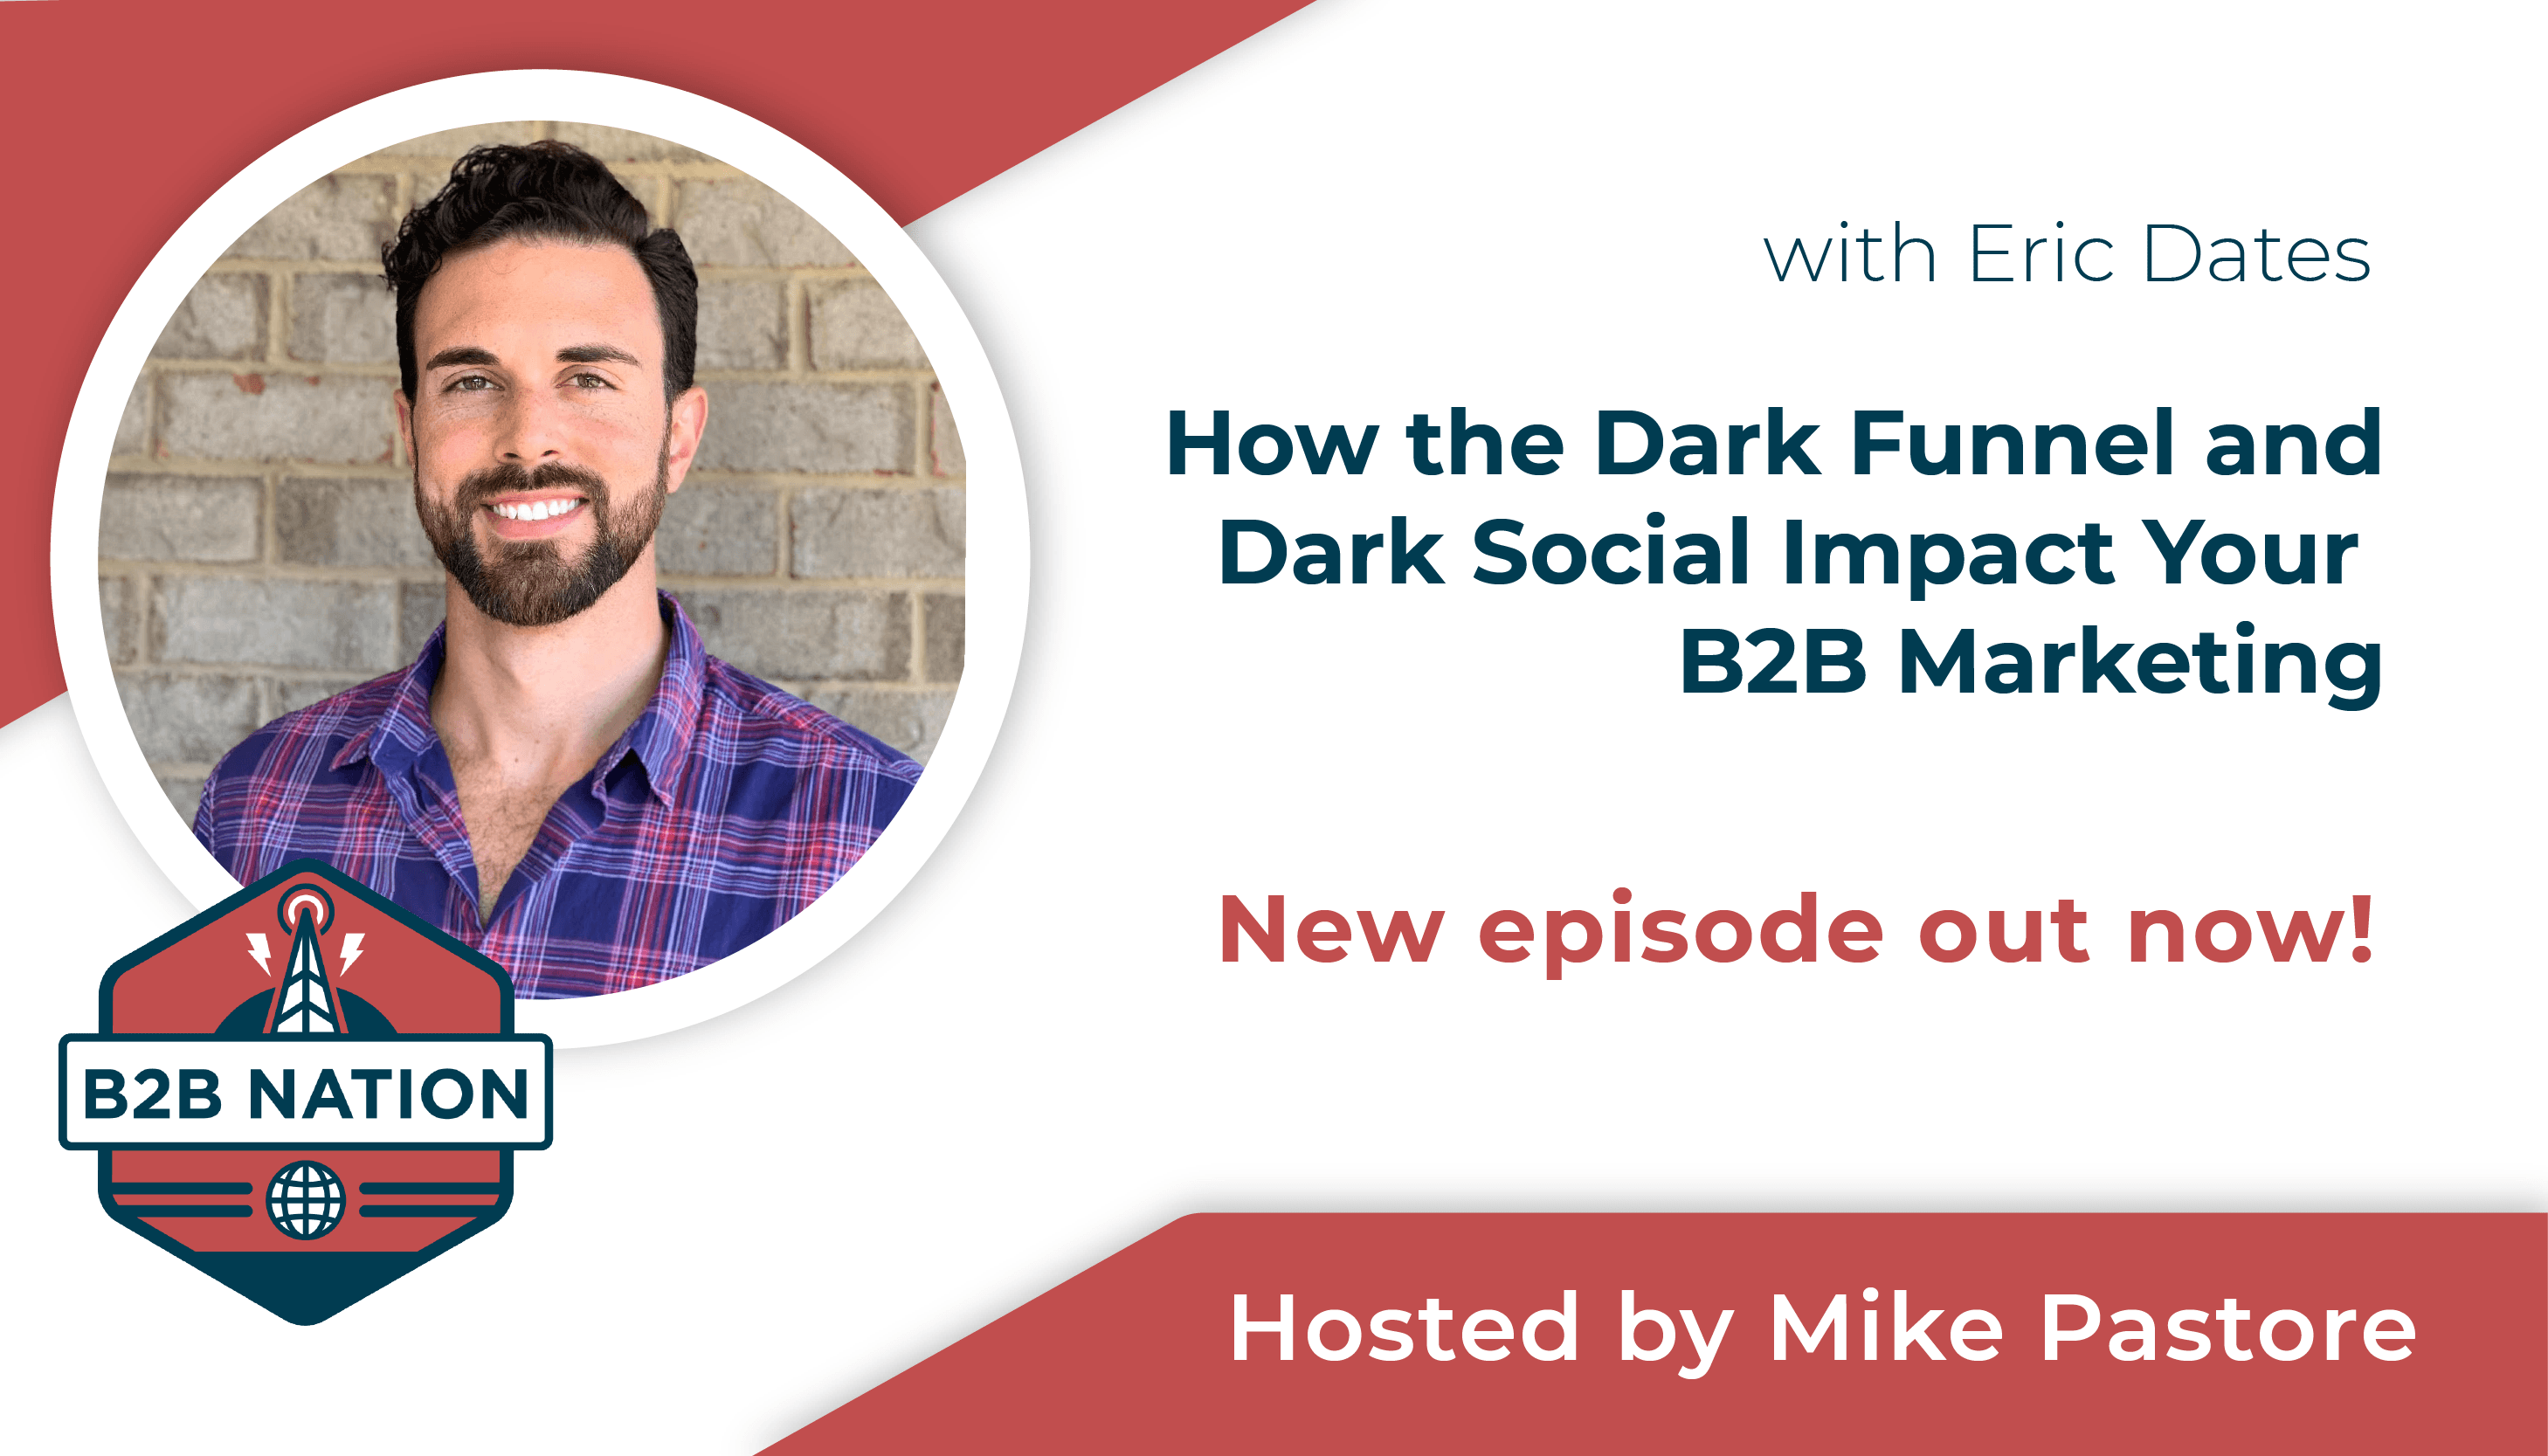 How the Dark Funnel and Dark Social Impact Your B2B Marketing